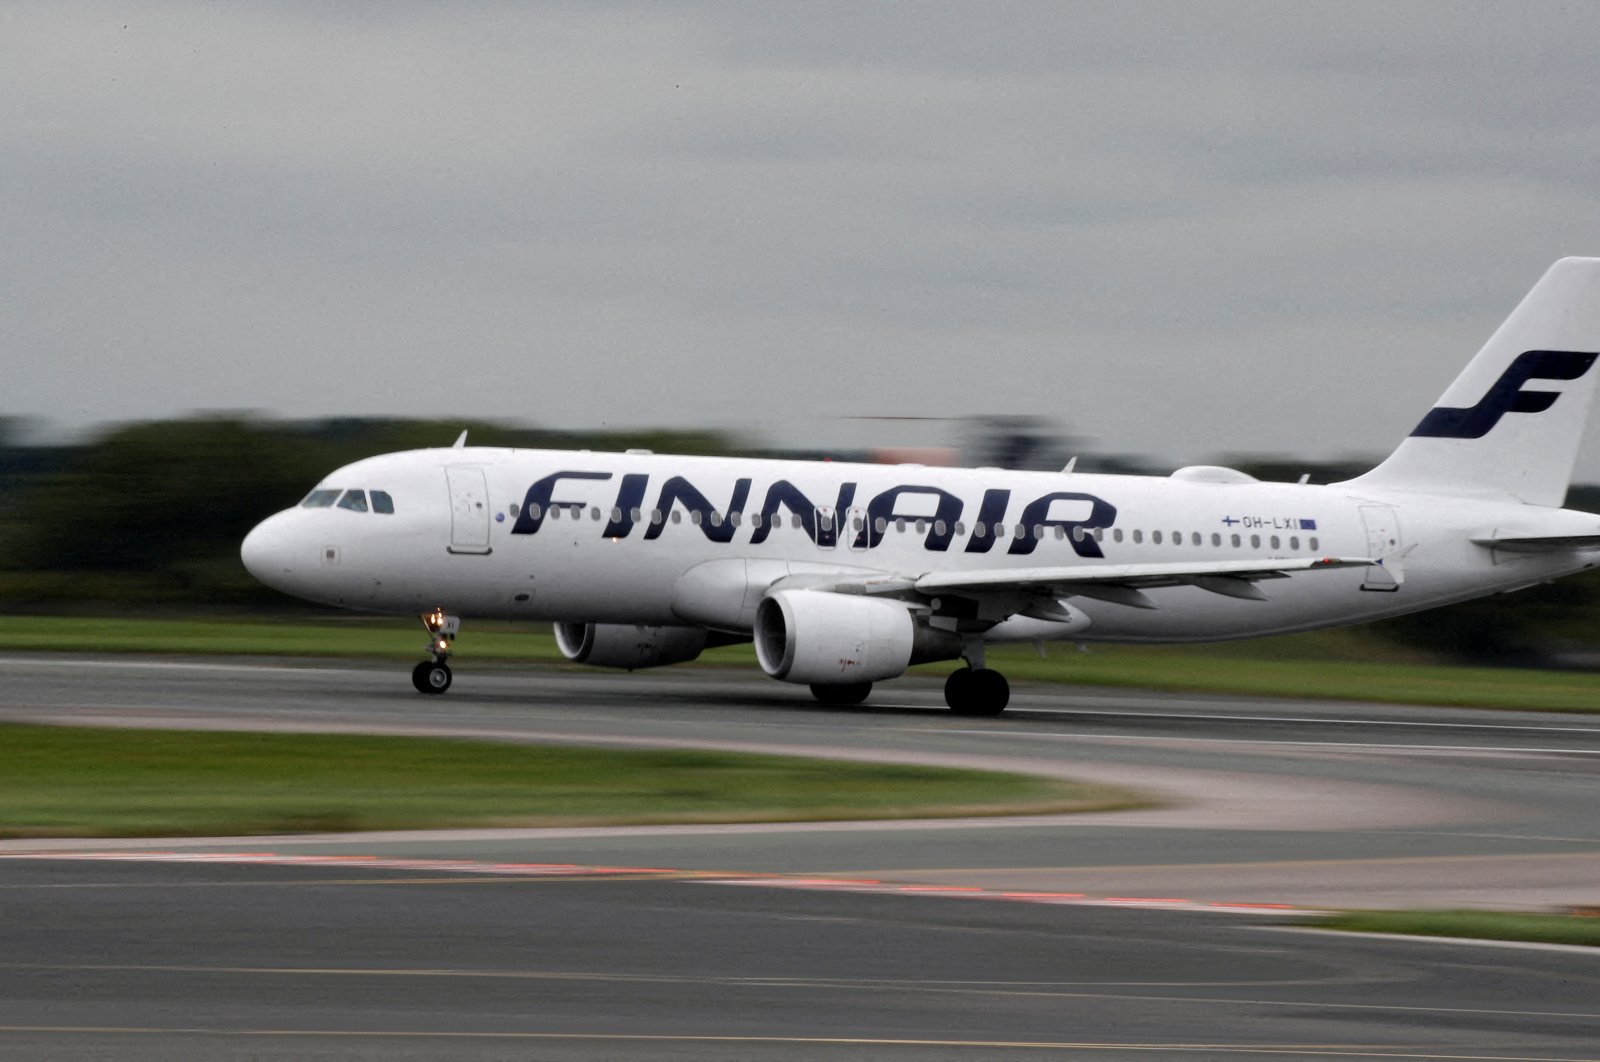 A Finnair Airbus A320-200 aircraft prepares to take off from Manchester Airport in Manchester, U.K., Sept. 4, 2018. (Reuters File Photo)